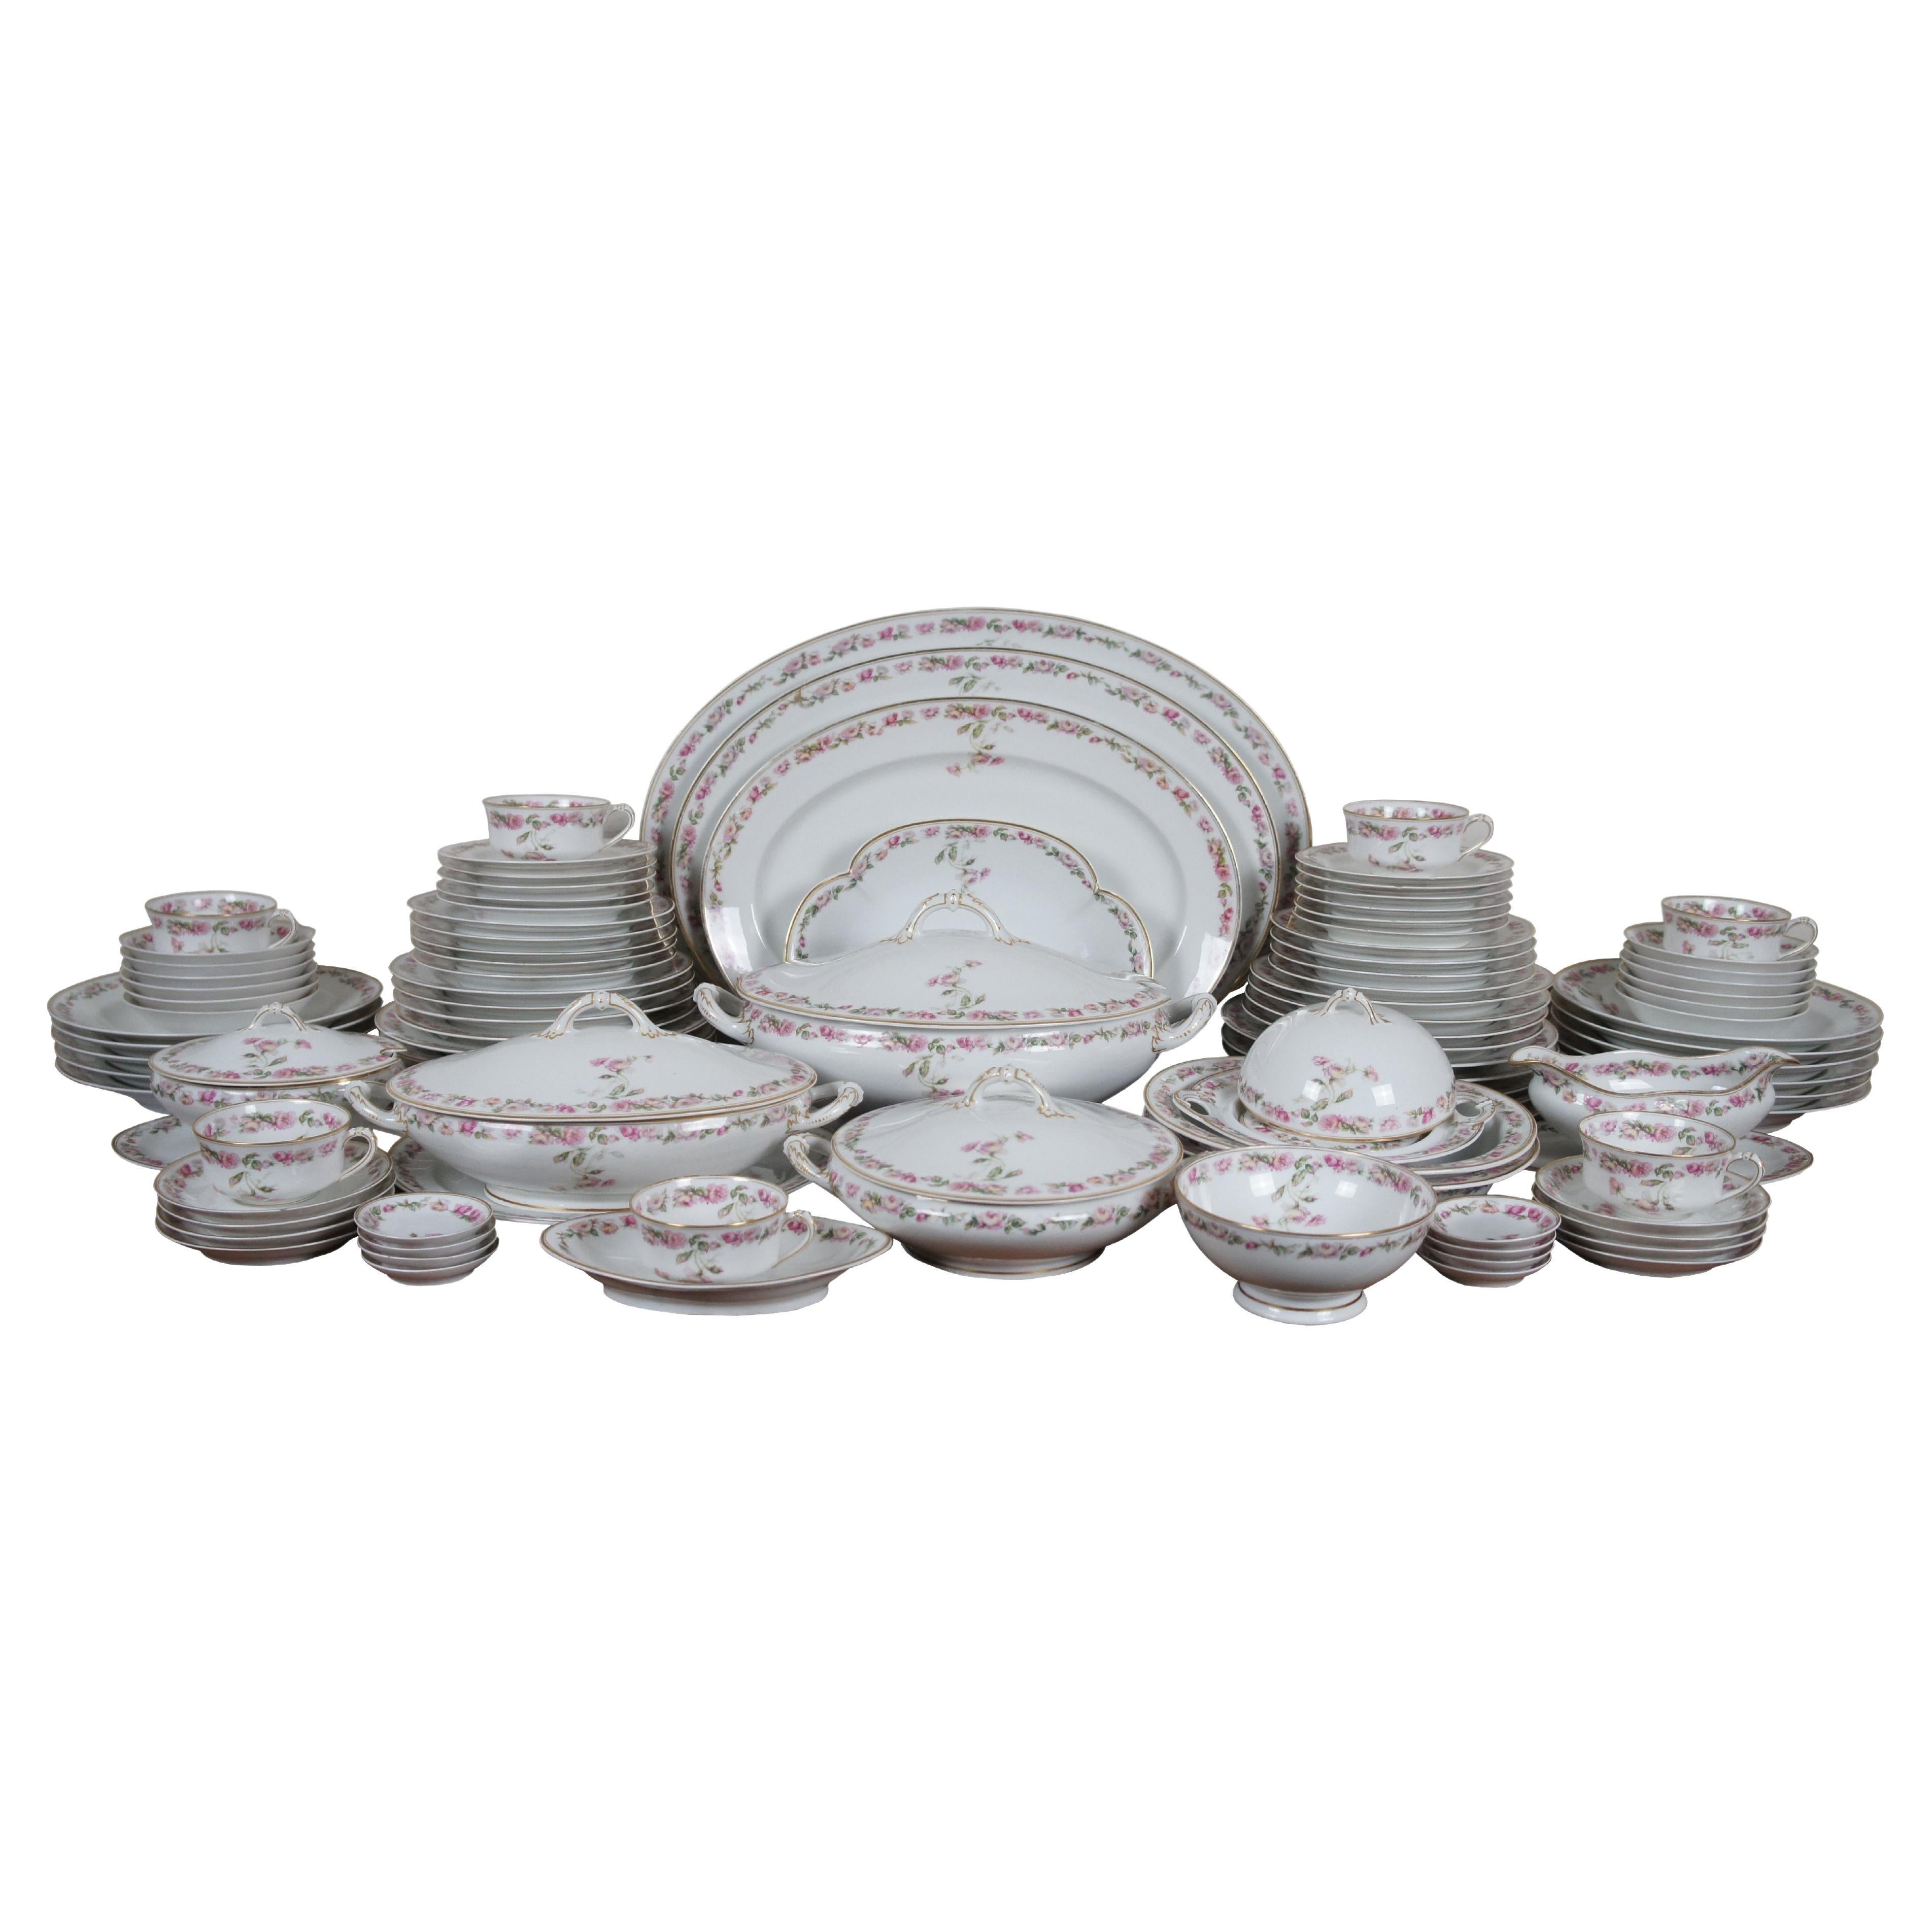 How much is Haviland Limoges china worth?